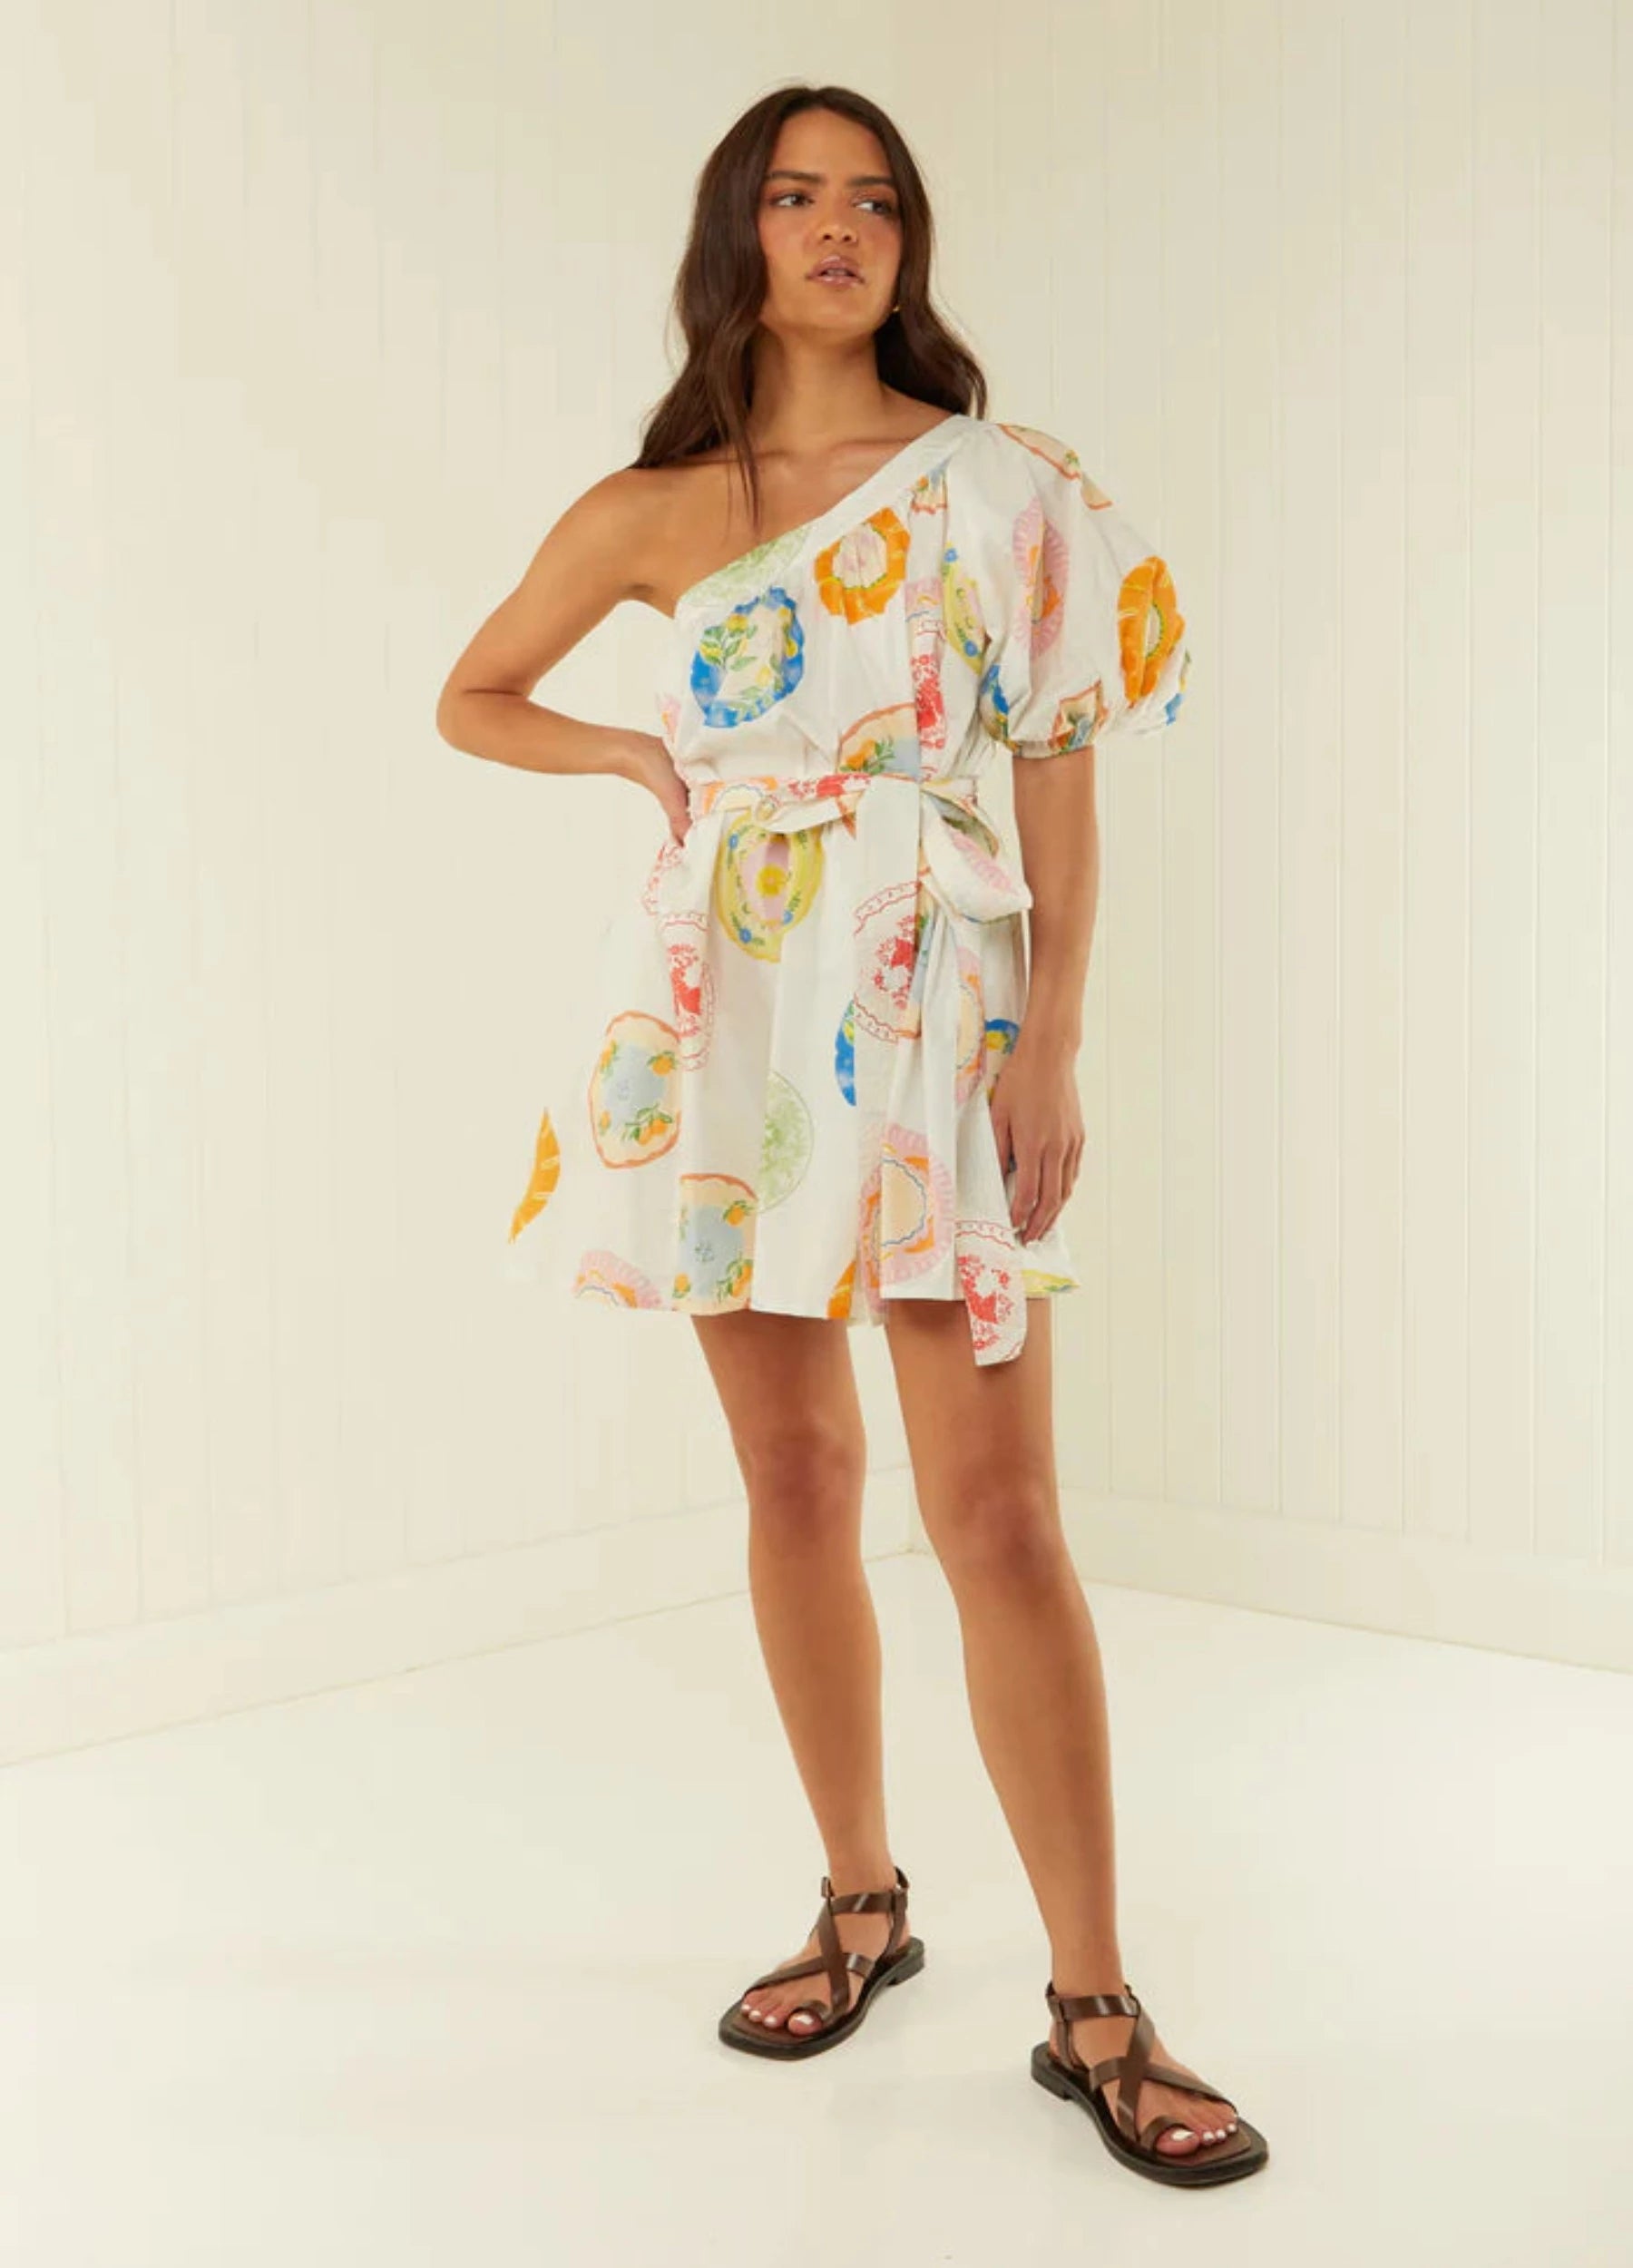 Shop the Lotus Mini Dress from Palm Noosa at She Creates Stories in Singapore